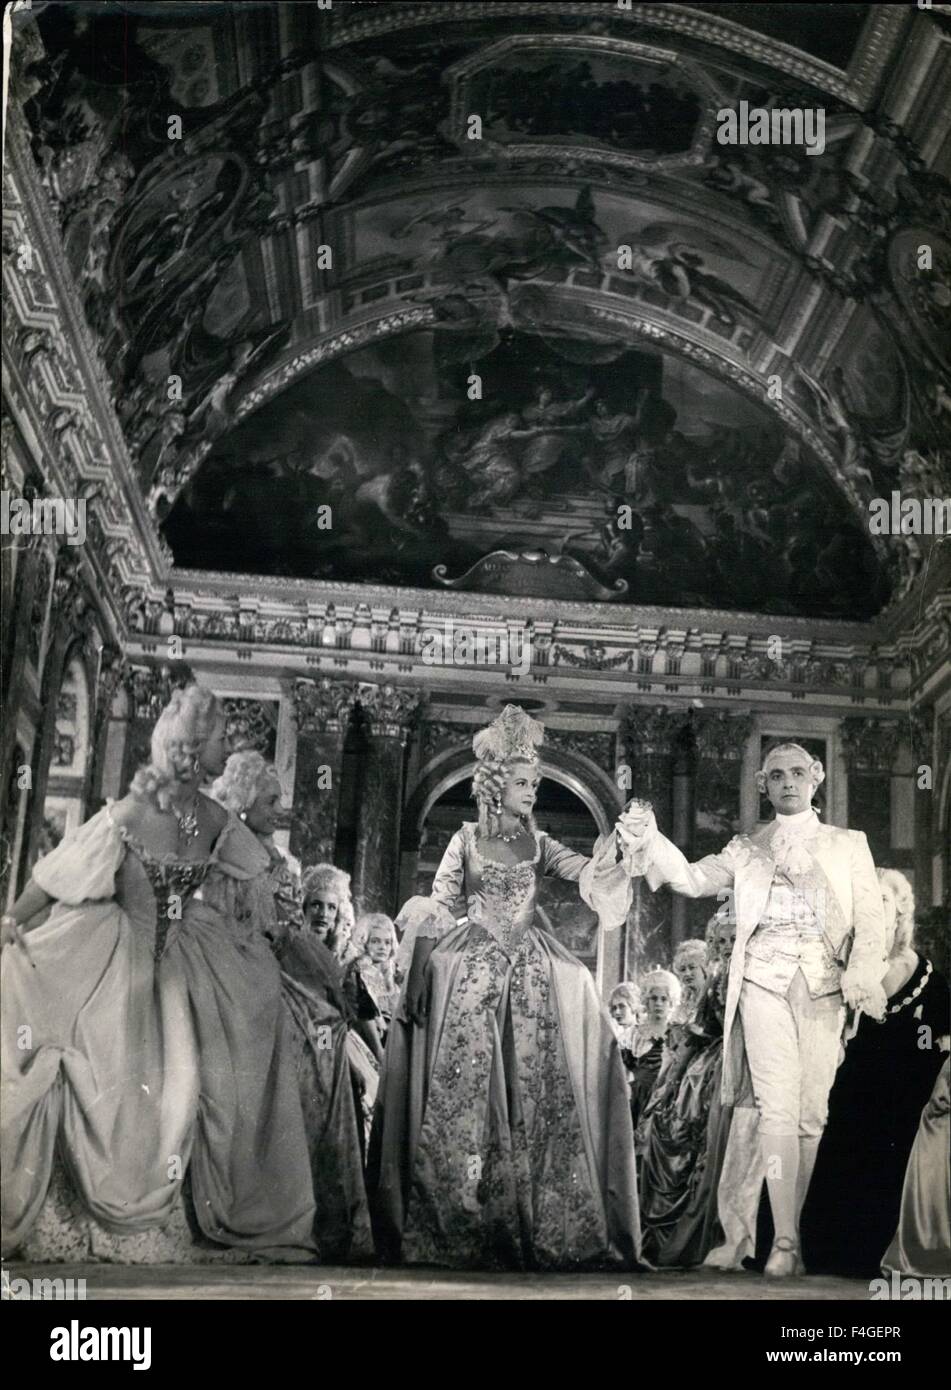 Sacha Guitry revives Versailles history A scene of the new film produced by Sacha Guitry evoking the glorious history of Versailles. 20th July, 1953. Louis XVI (Gilbert Boka) and Marie Antoinette (Lama Marconi) are seen here in the gorgeous surroundings of the hall mirrors. July 20/53 © Keystone Pictures USA/ZUMAPRESS.com/Alamy Live News Stock Photo